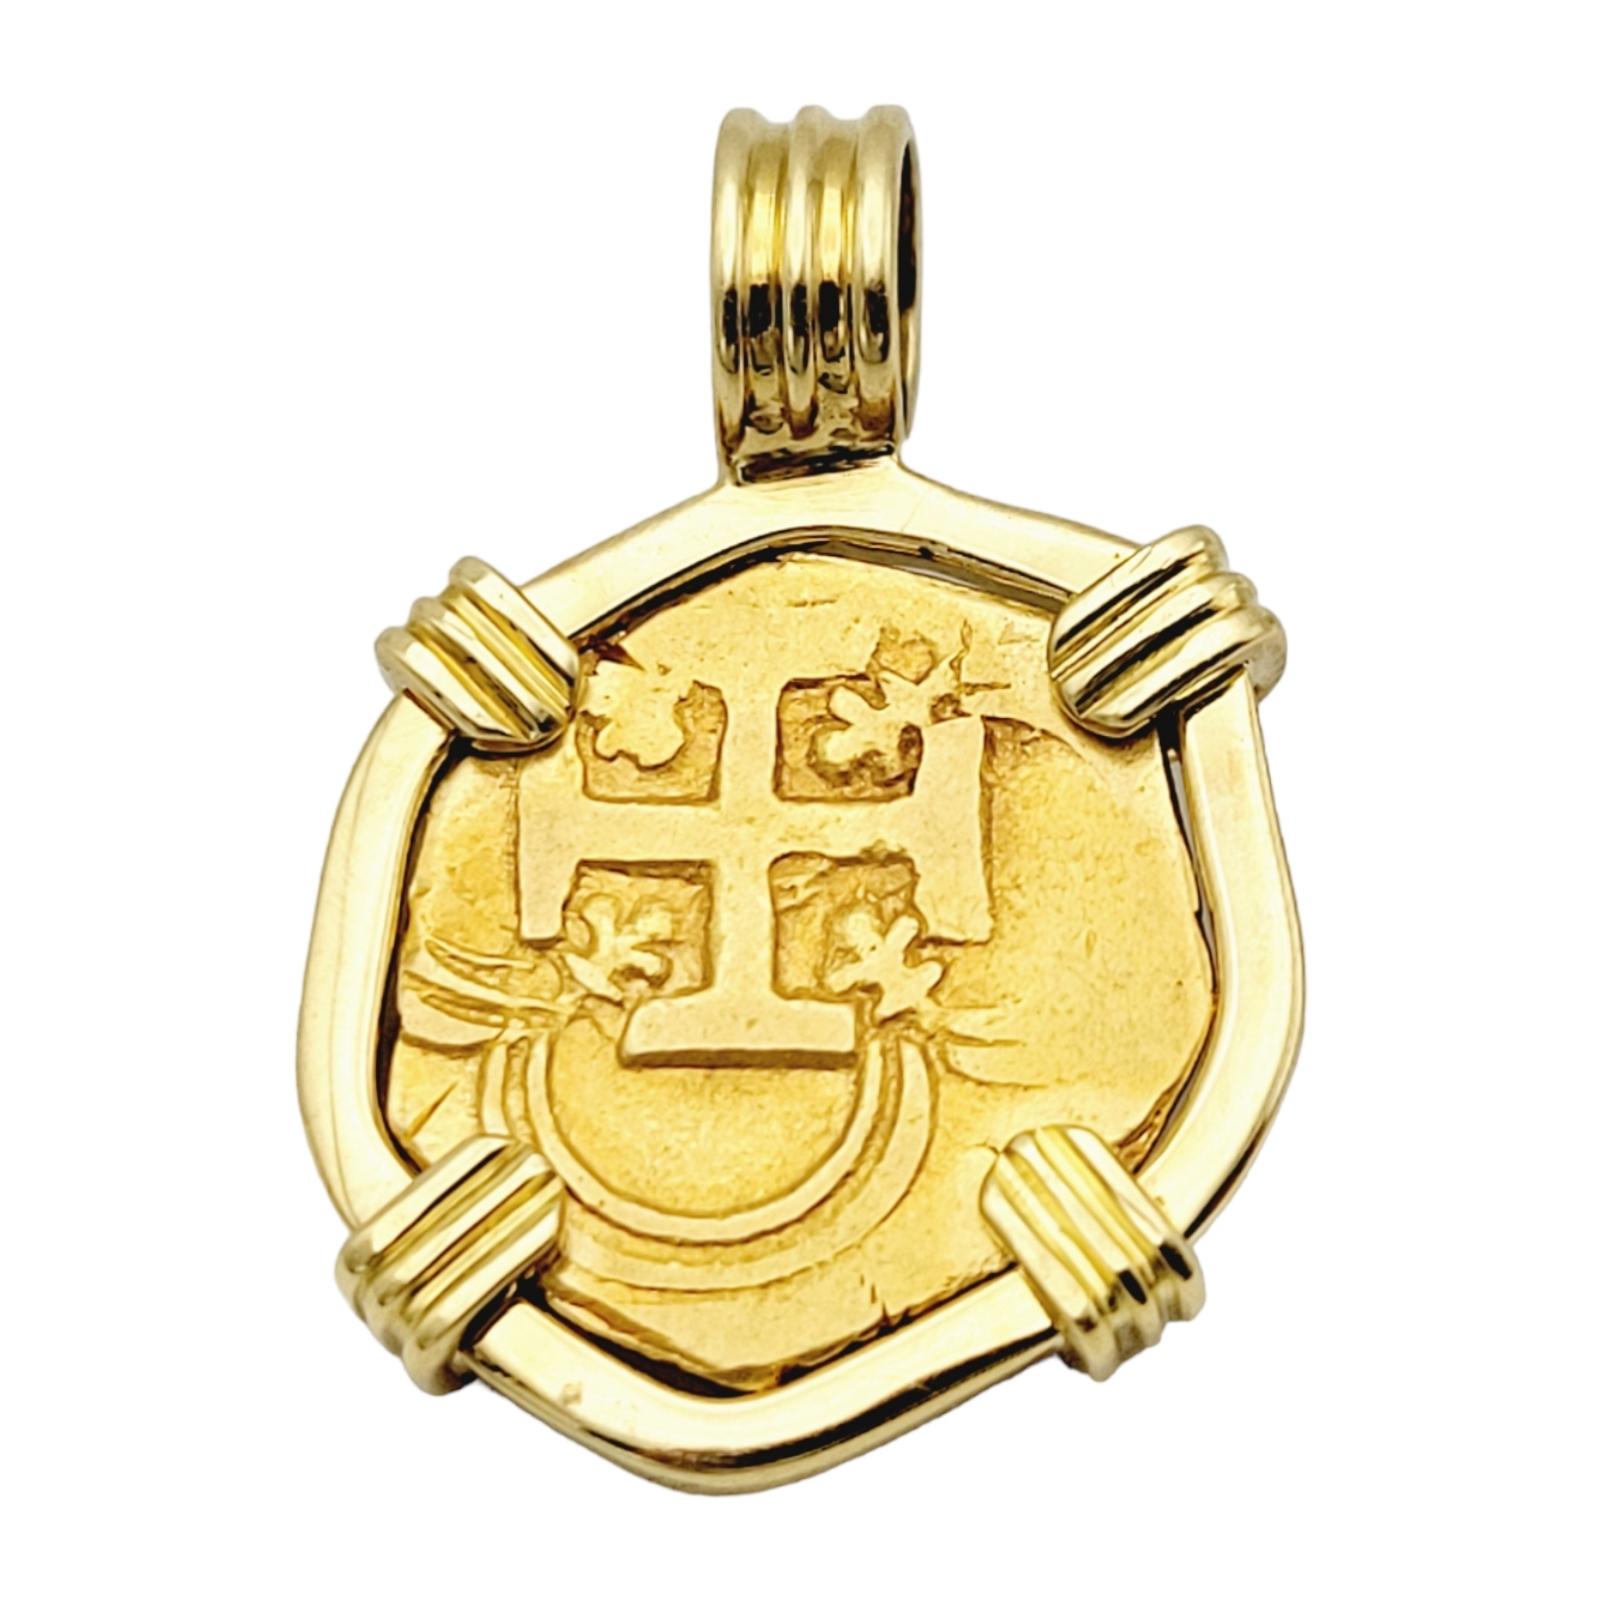 Incredible 22-karat Spanish 2 Escudos treasure coin set in a polished 18 karat yellow gold bezel setting. The impressive coin was created during the 1600s with some details still visible! 

This pendant features a single Spanish 2 Escudos 22-karat